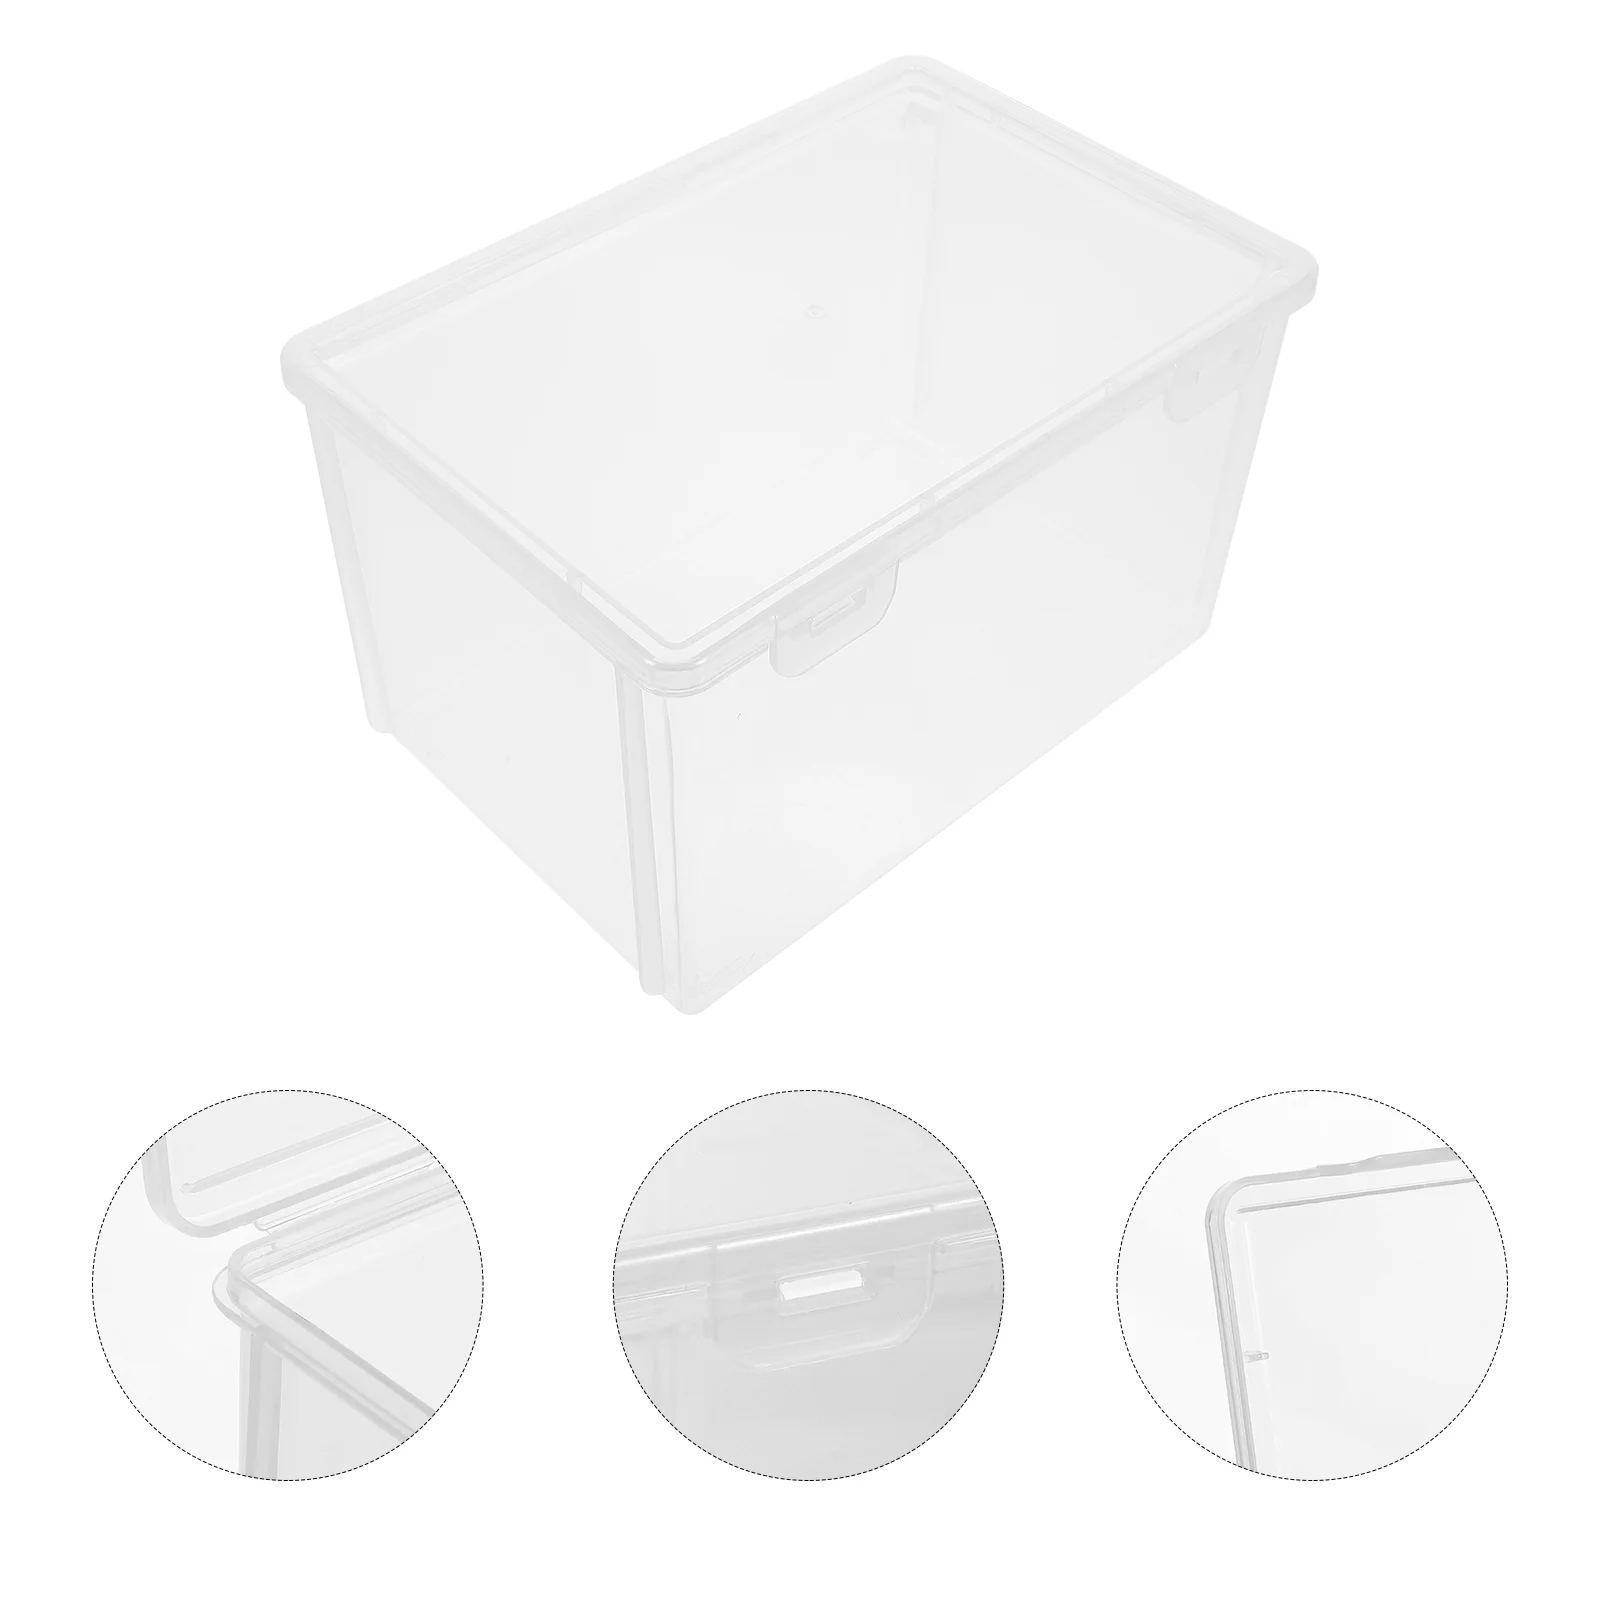 

Bread Container Storage Box Keeper Loaf Dispenserplastic Clear Case Cake Containers Holder Airtight Toast Refrigerator Binbuddy